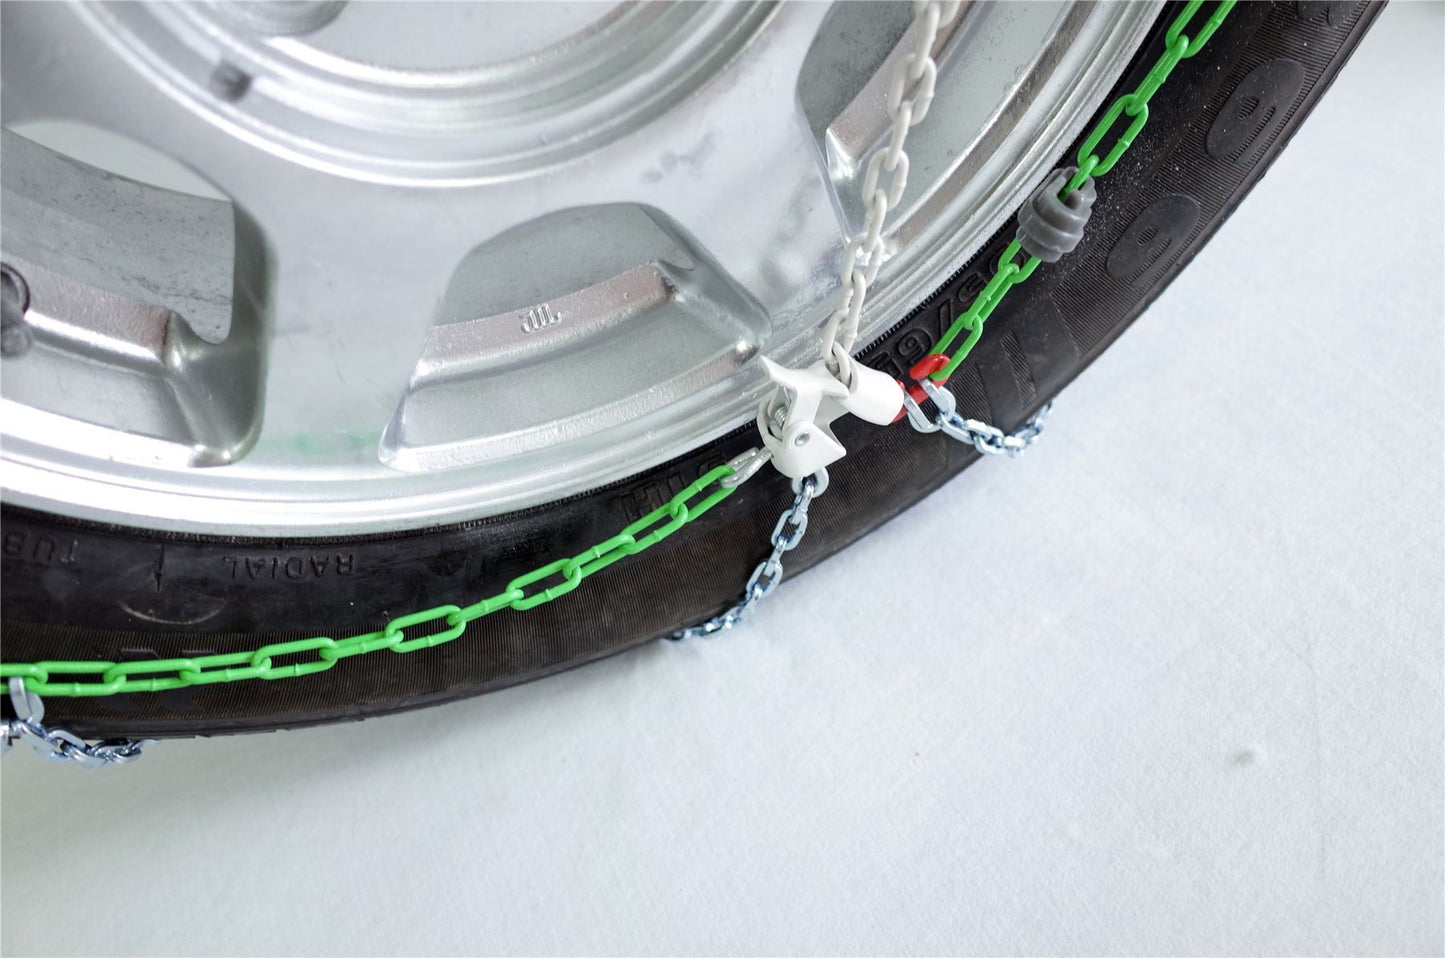 Green Valley TXR9 Winter 9mm Snow Chains - Car Tyre for 13" Wheels 185/55-13